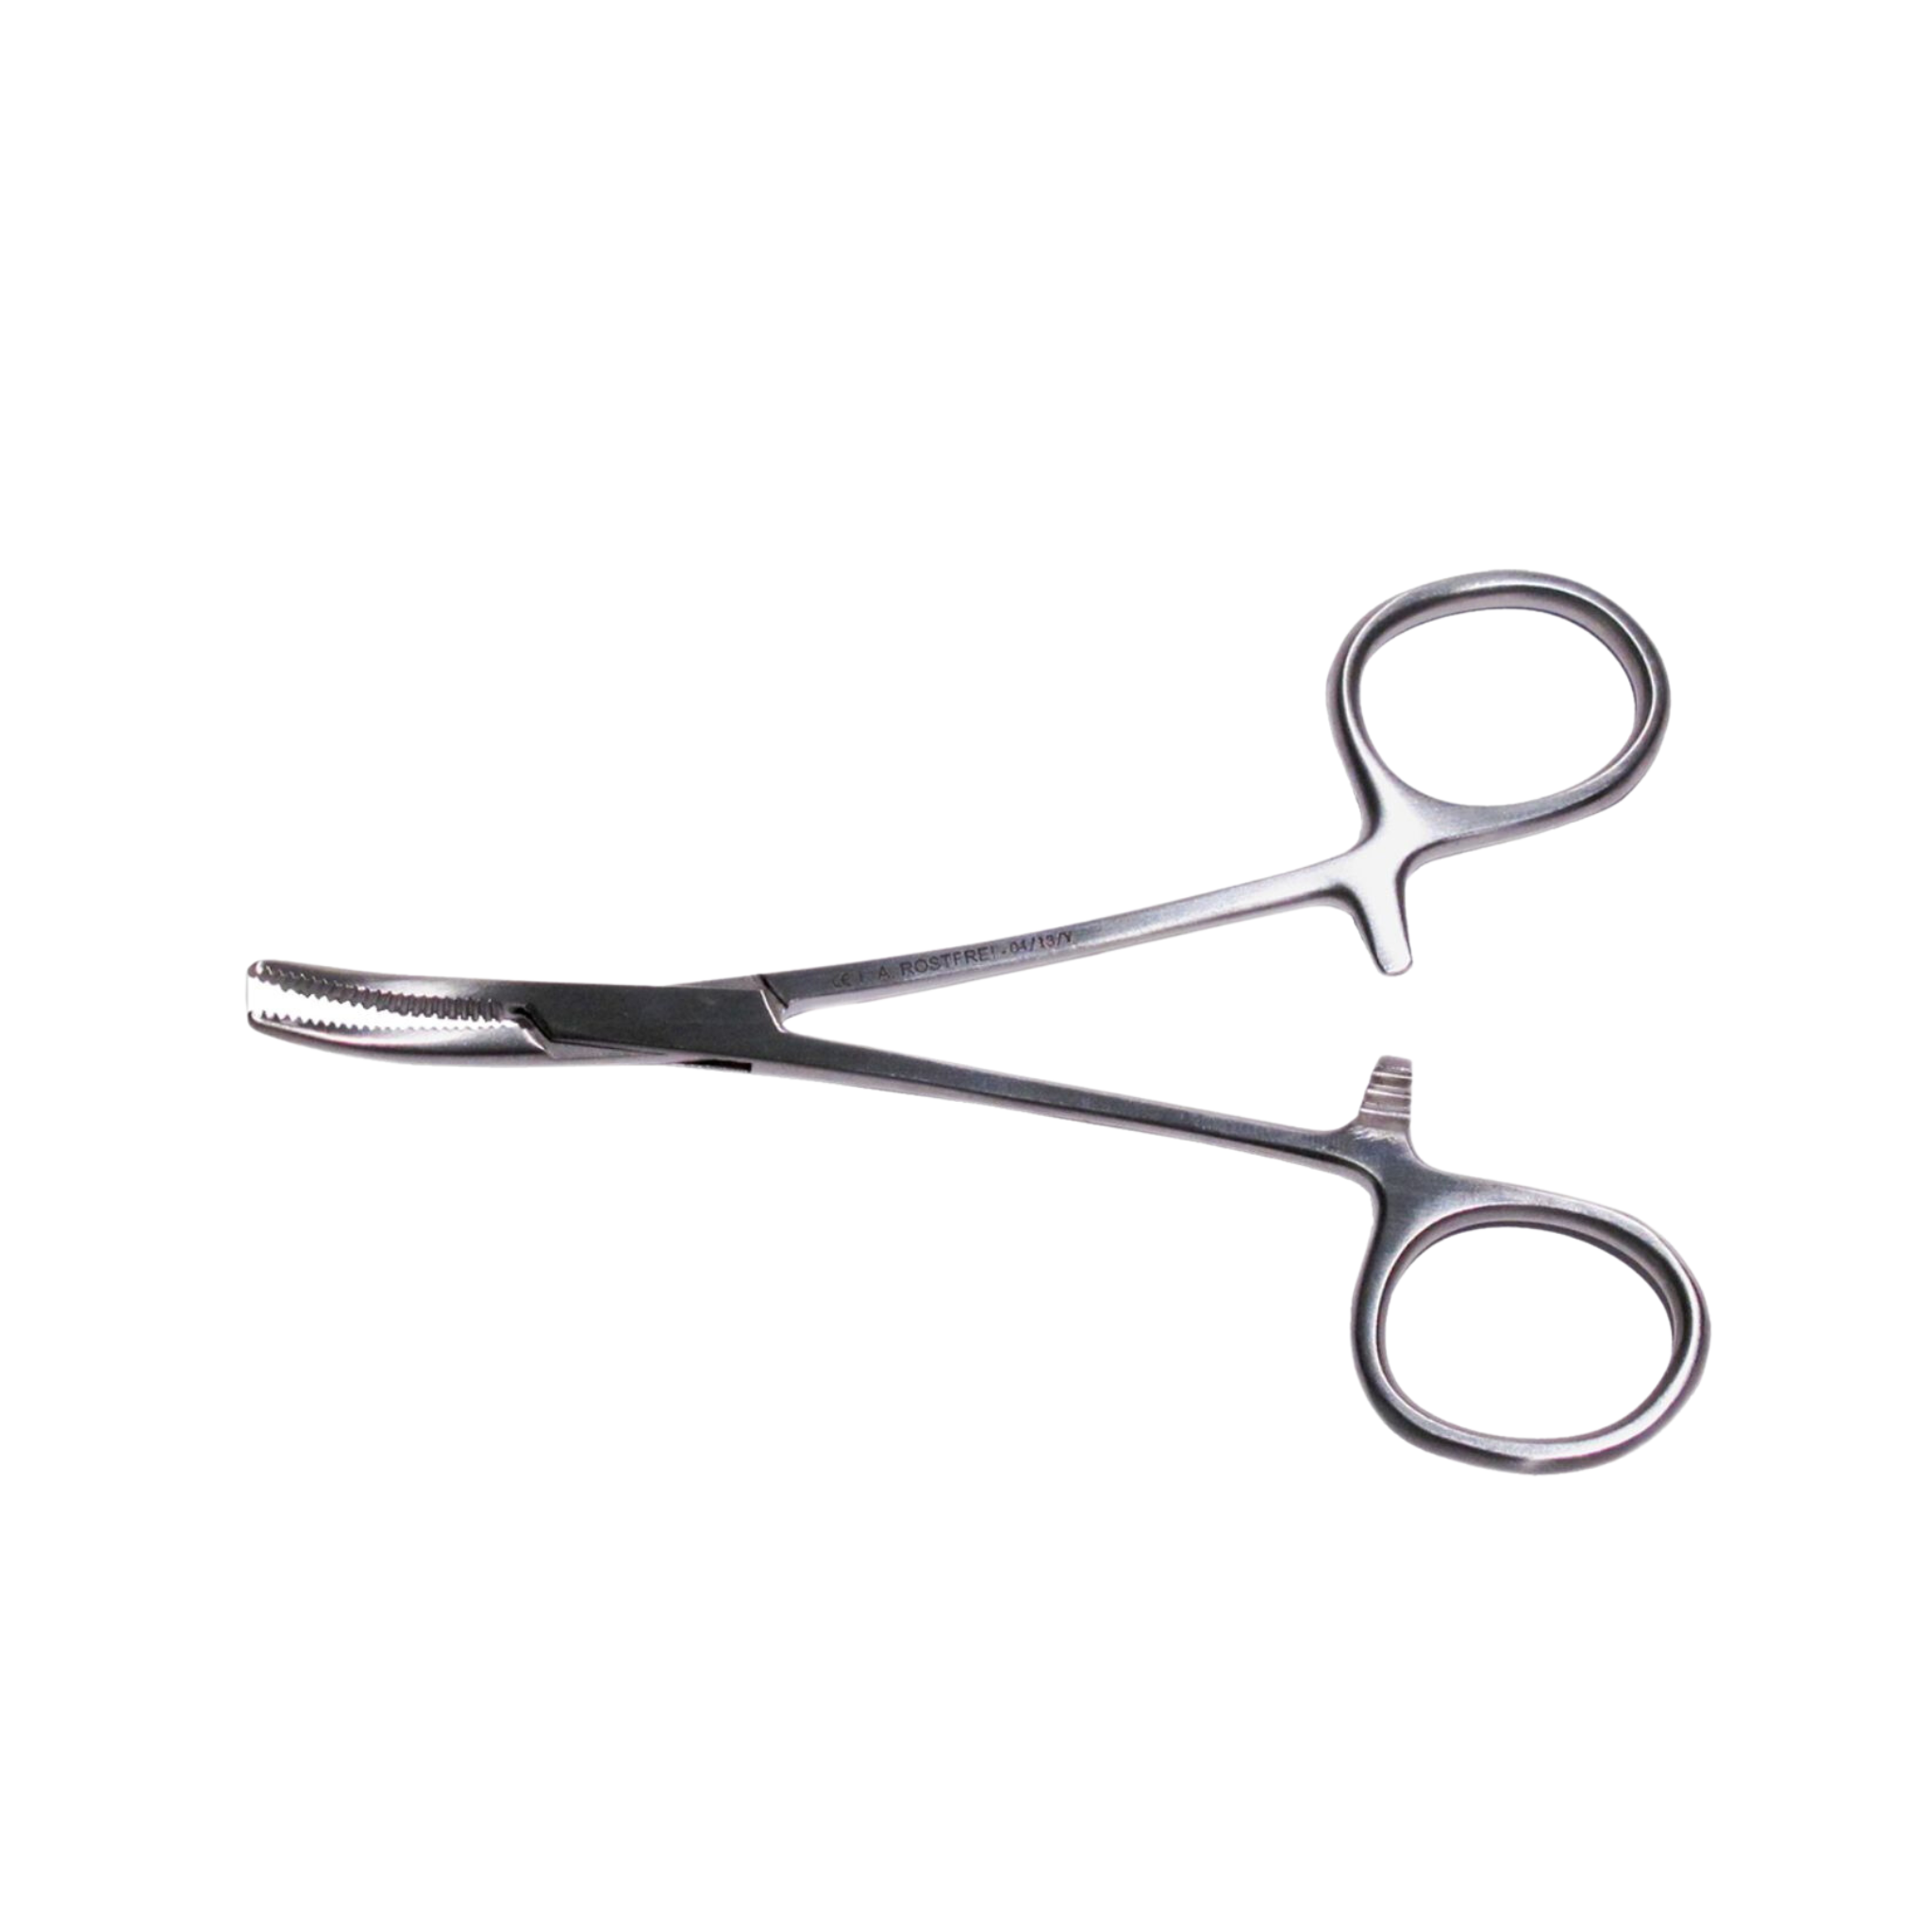 Lavabis hemostatic clamp Spencer Wells curved stainless steel